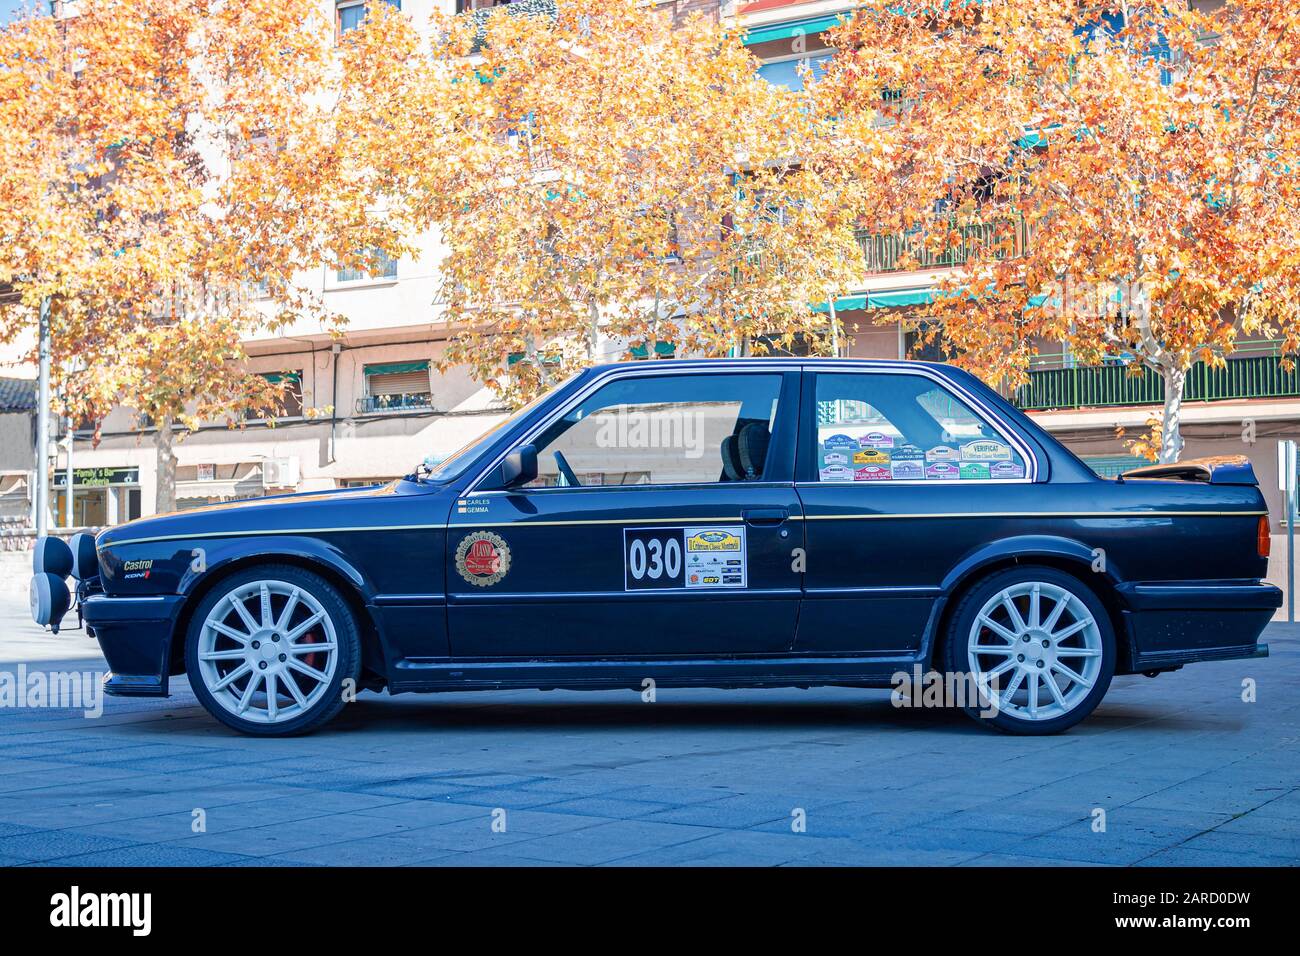 MONTMELO, SPAIN-NOVEMBER 30, 2019: BMW 3 Series (E30) two-door sedan (Second generation of BMW 3 Series), side view Stock Photo